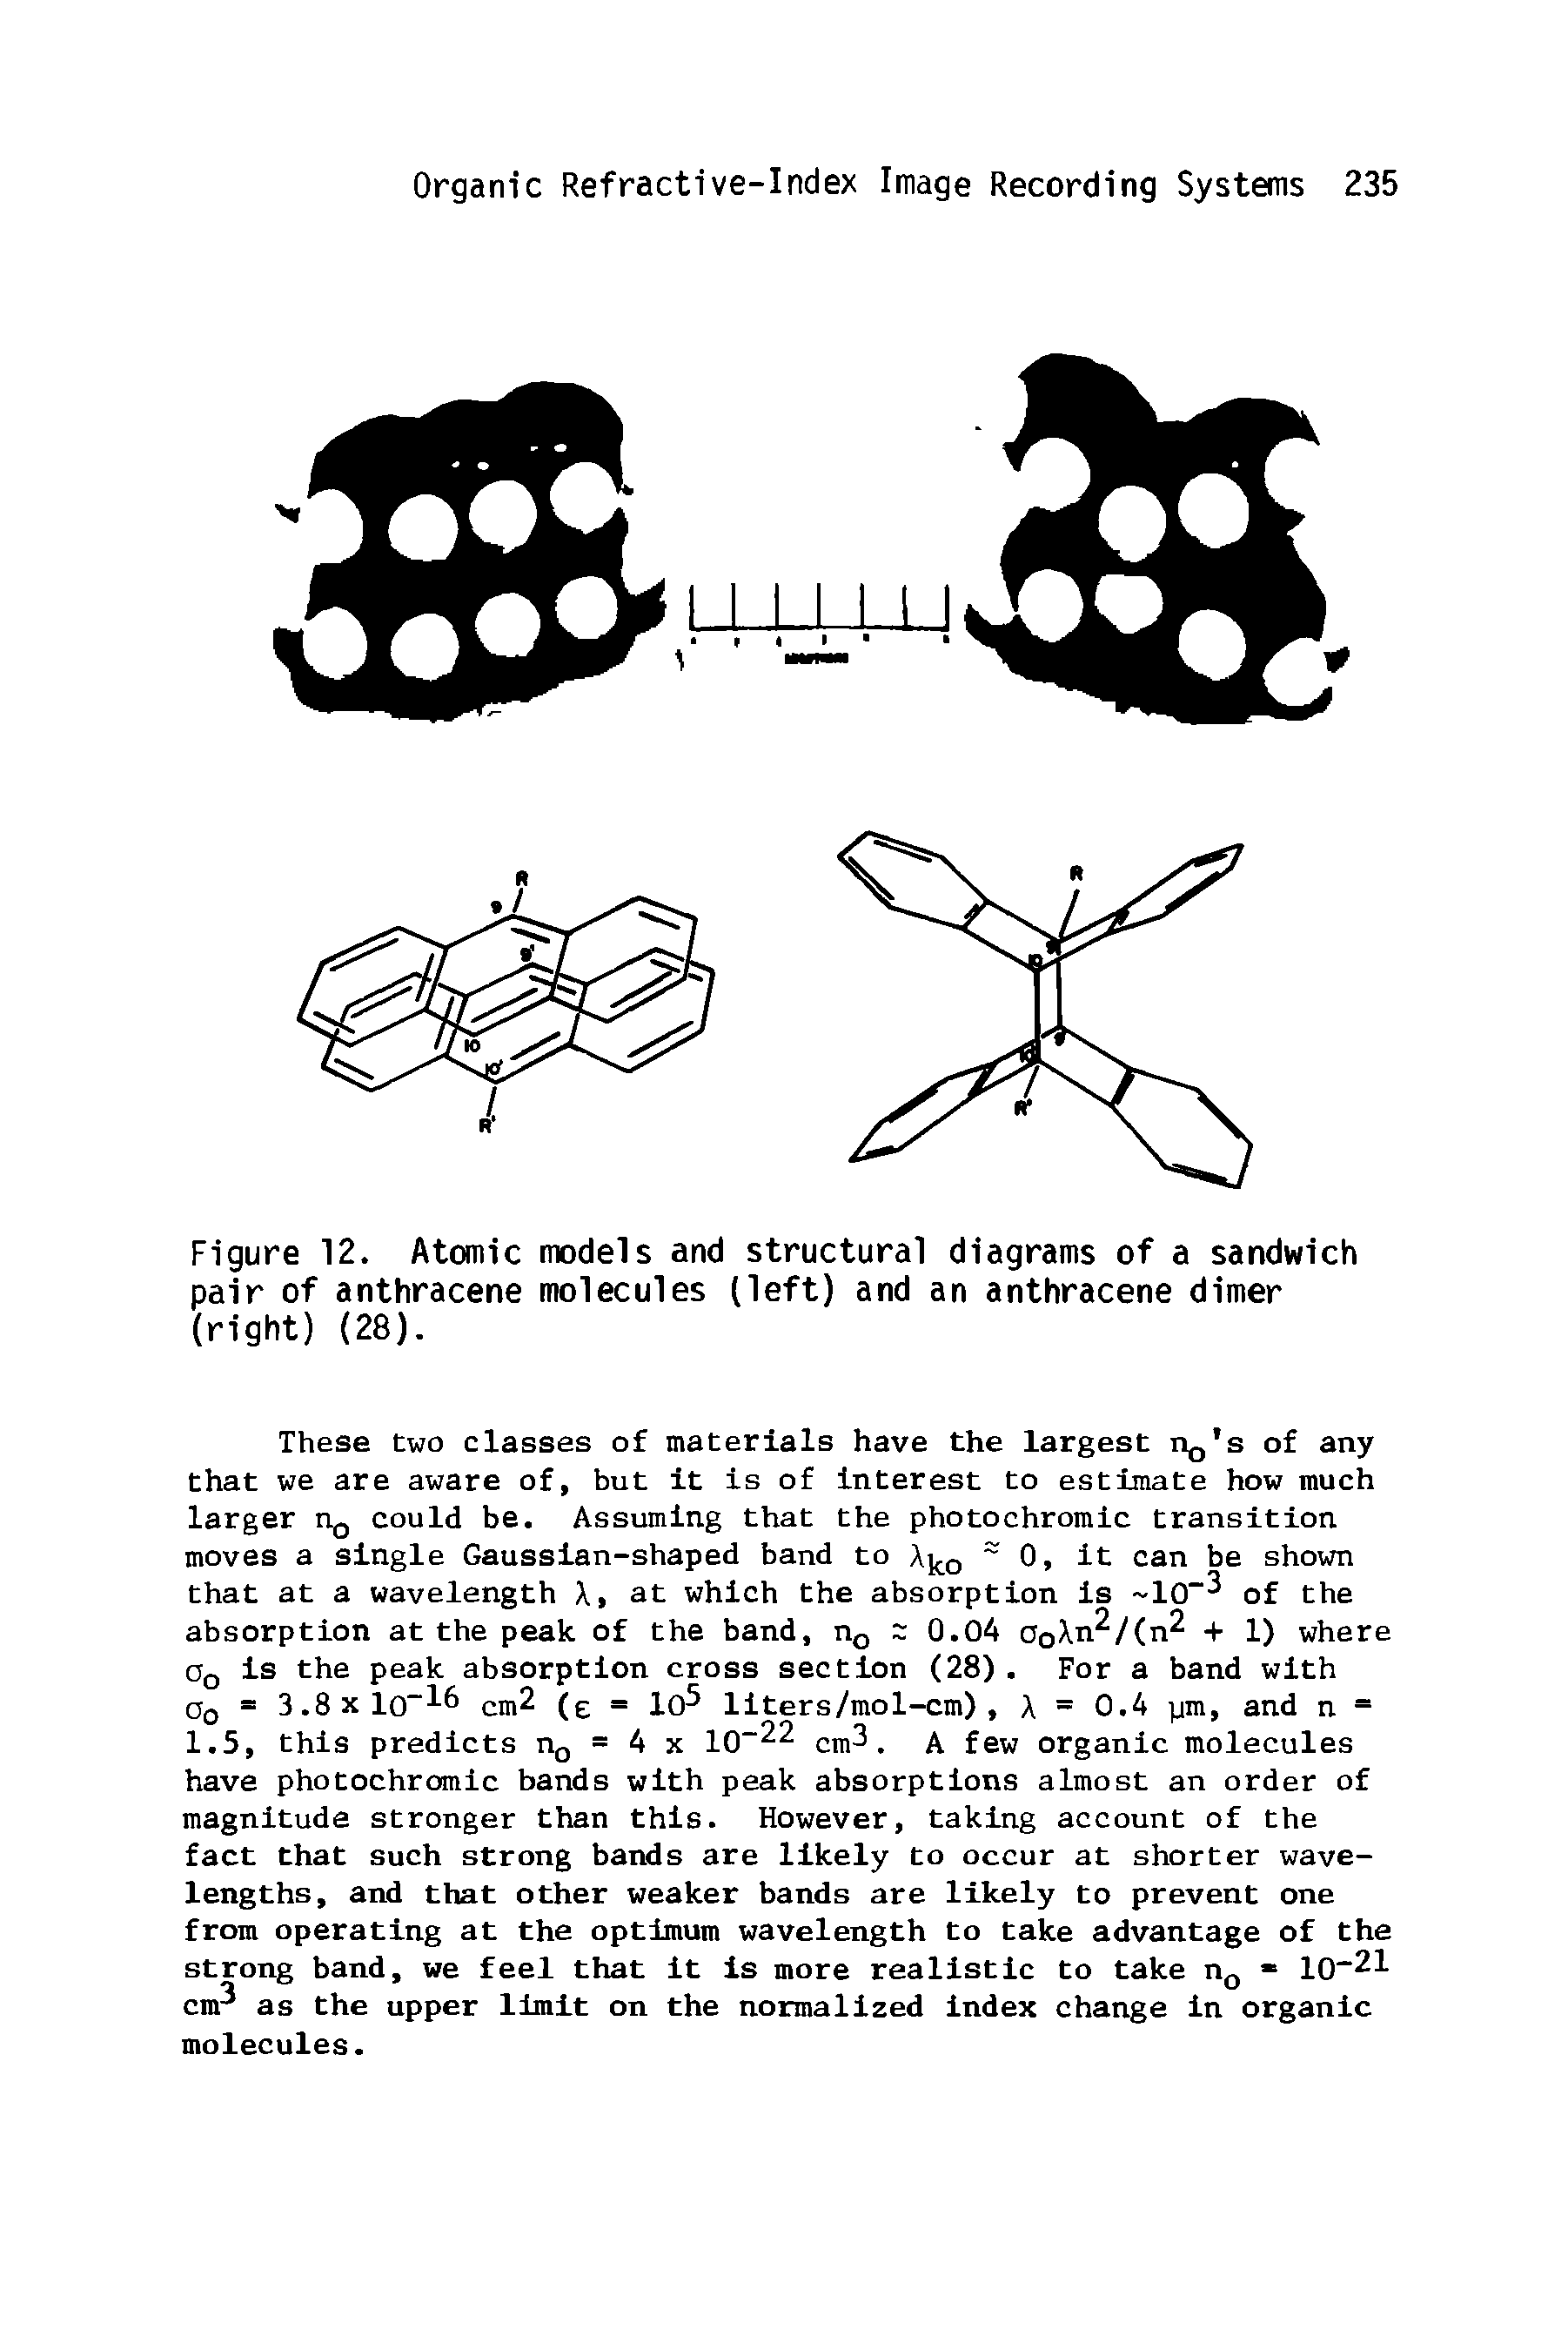 Figure 12. Atomic models and structural diagrams of a sandwich pair of anthracene molecules (left) and an anthracene dimer (right) (28).